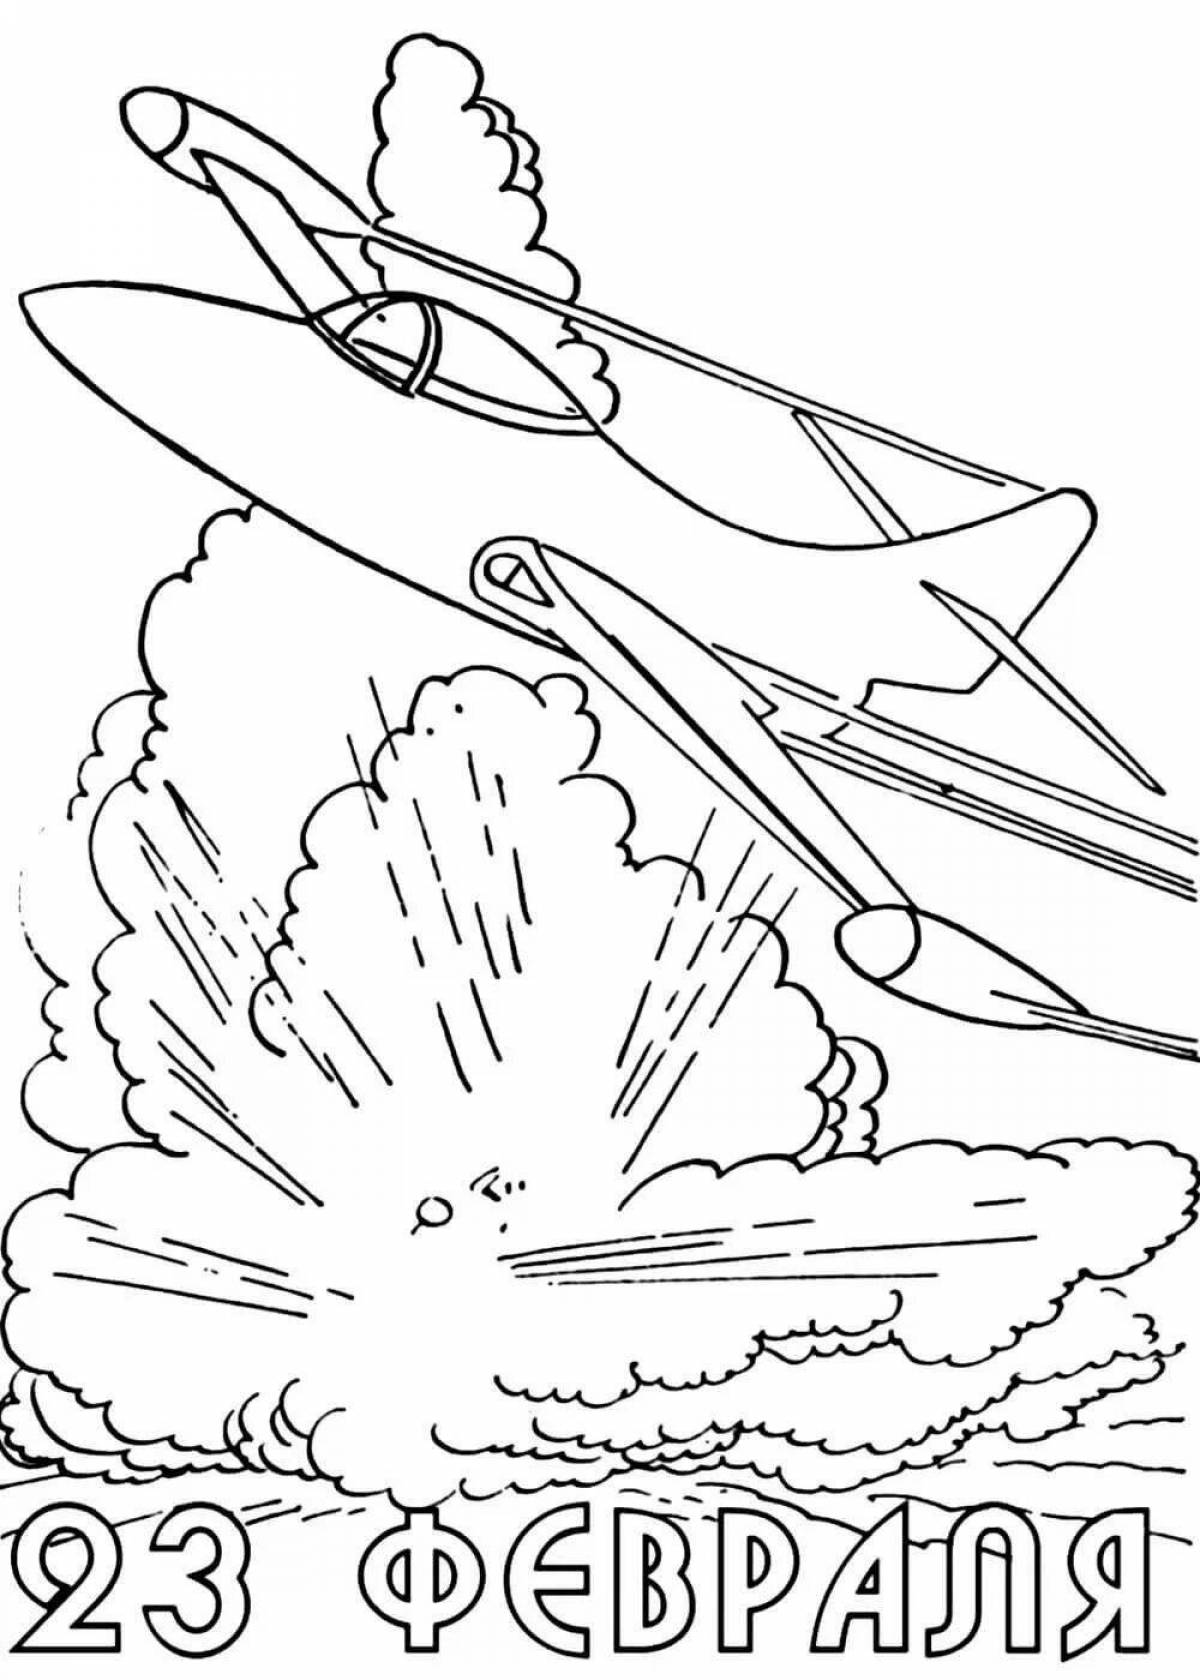 Attractive Defender's Day Coloring Page